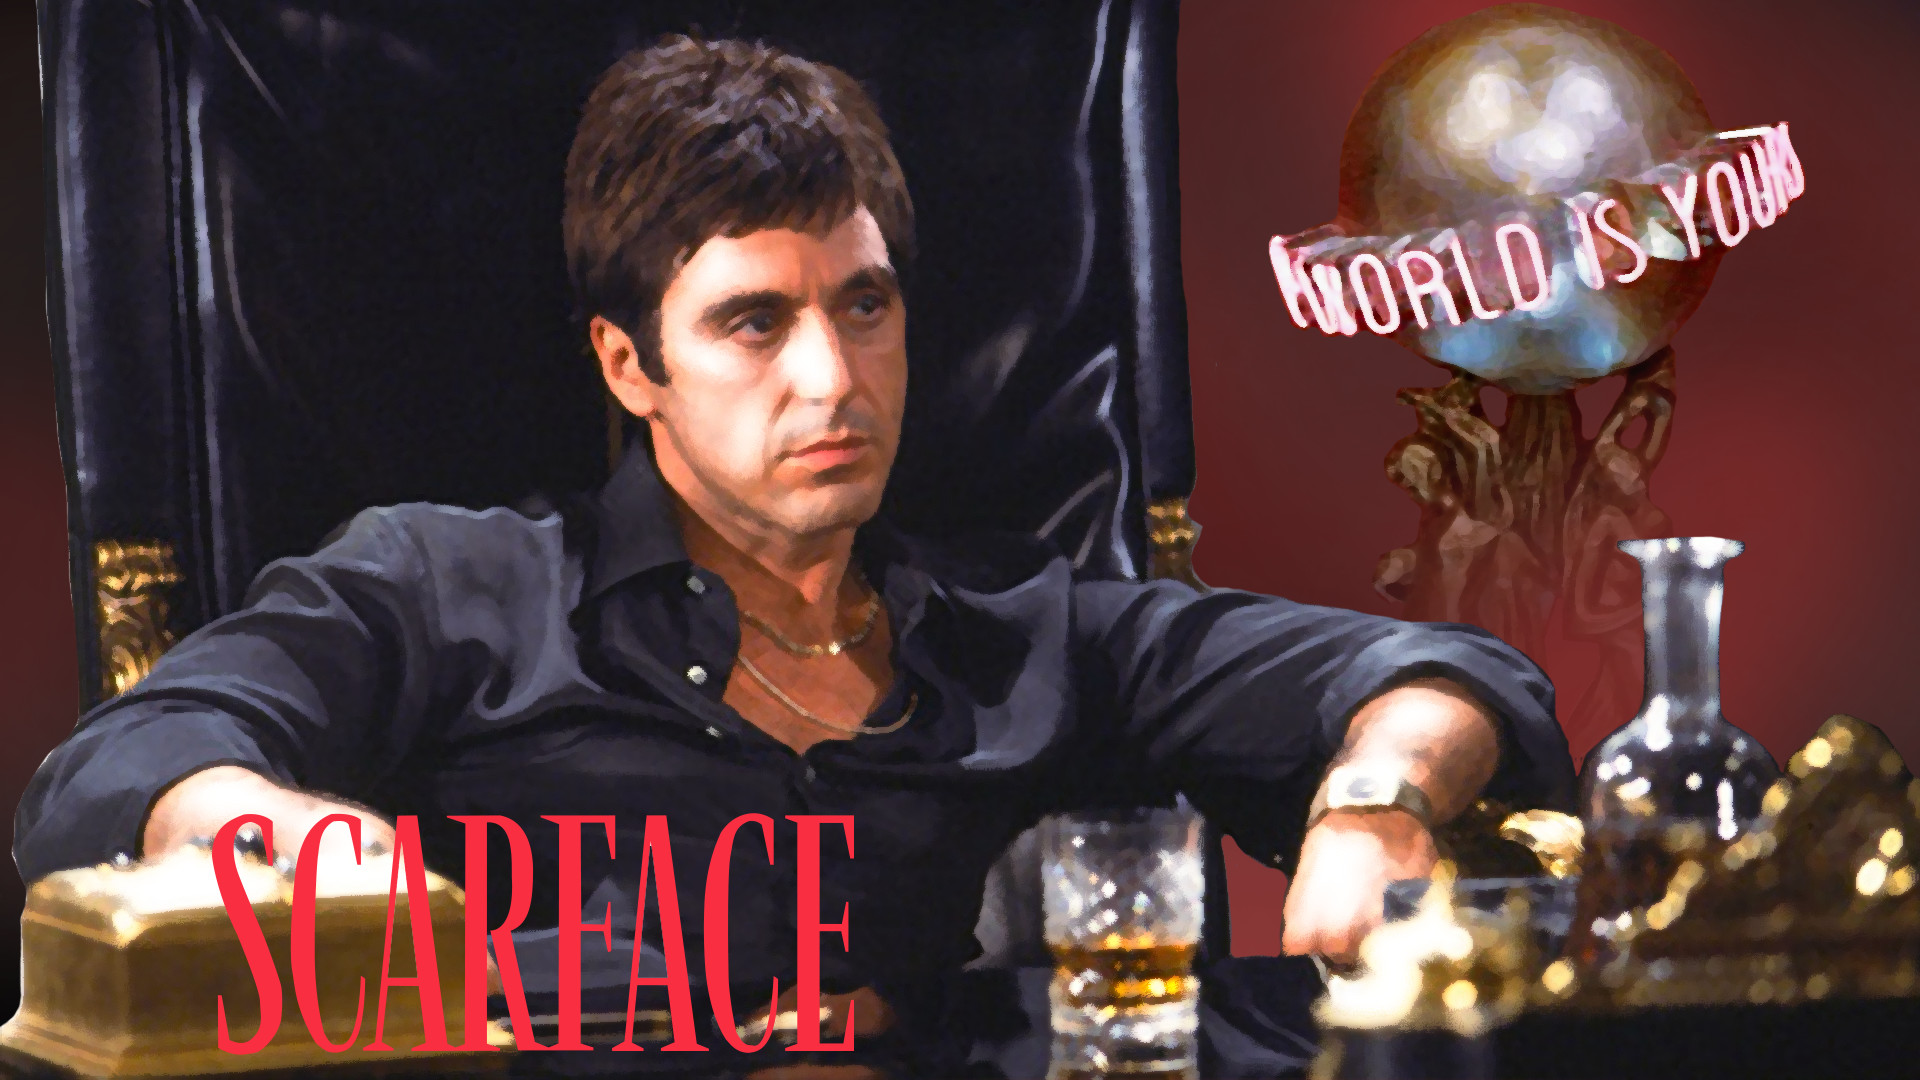 Scarface Wallpaper the World is Yours (76+ pictures)